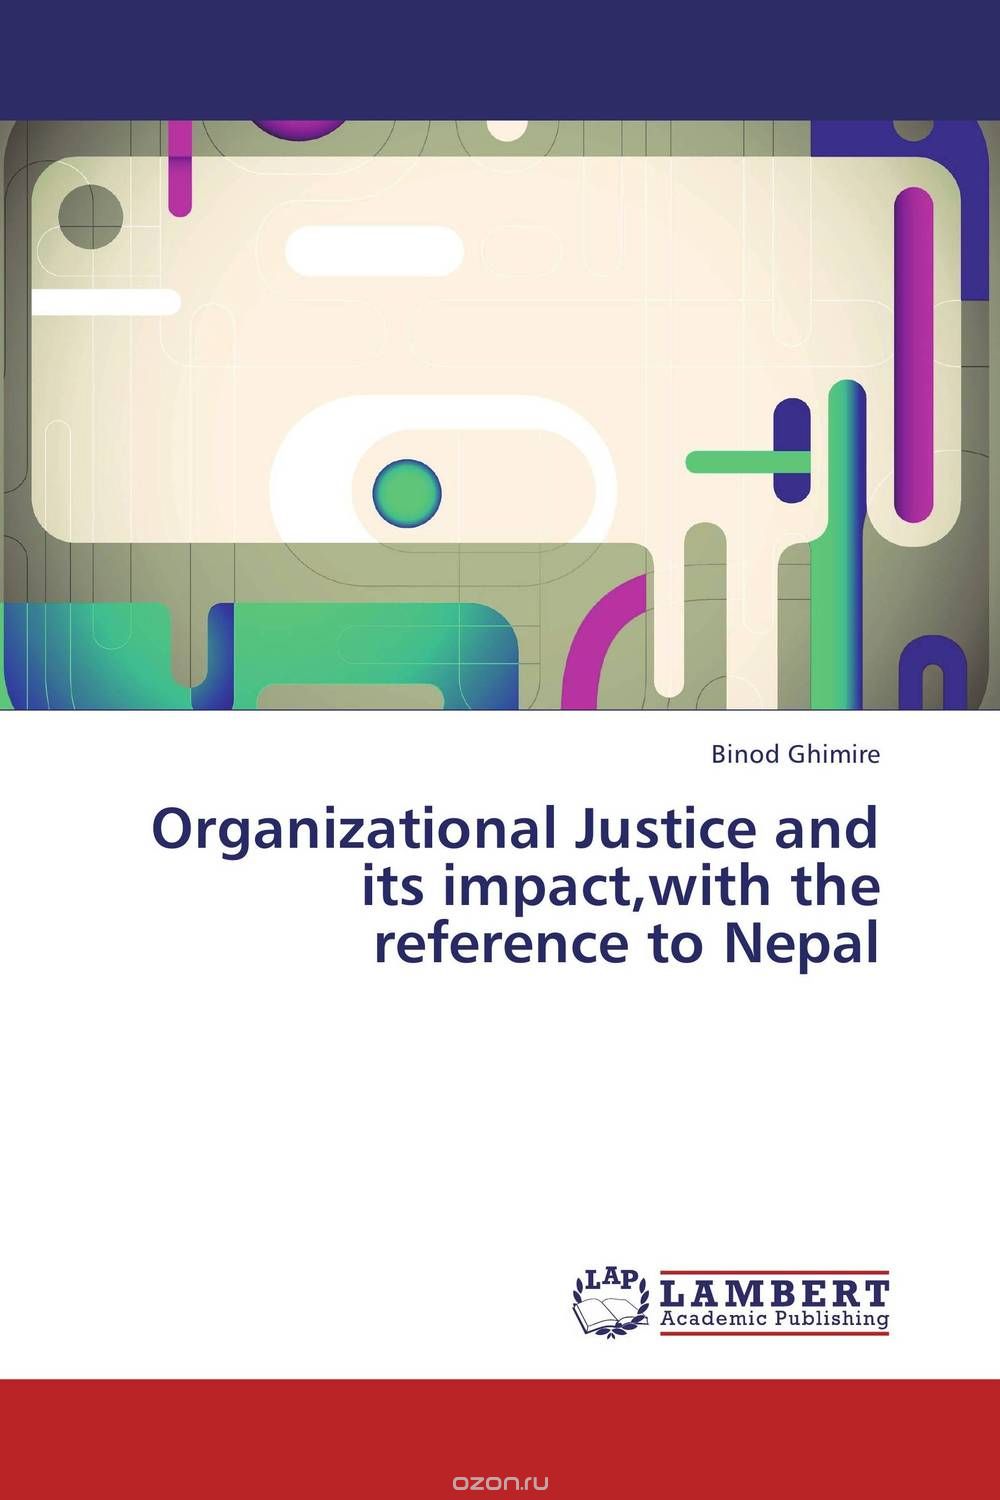 Скачать книгу "Organizational Justice and its impact,with the reference to Nepal"